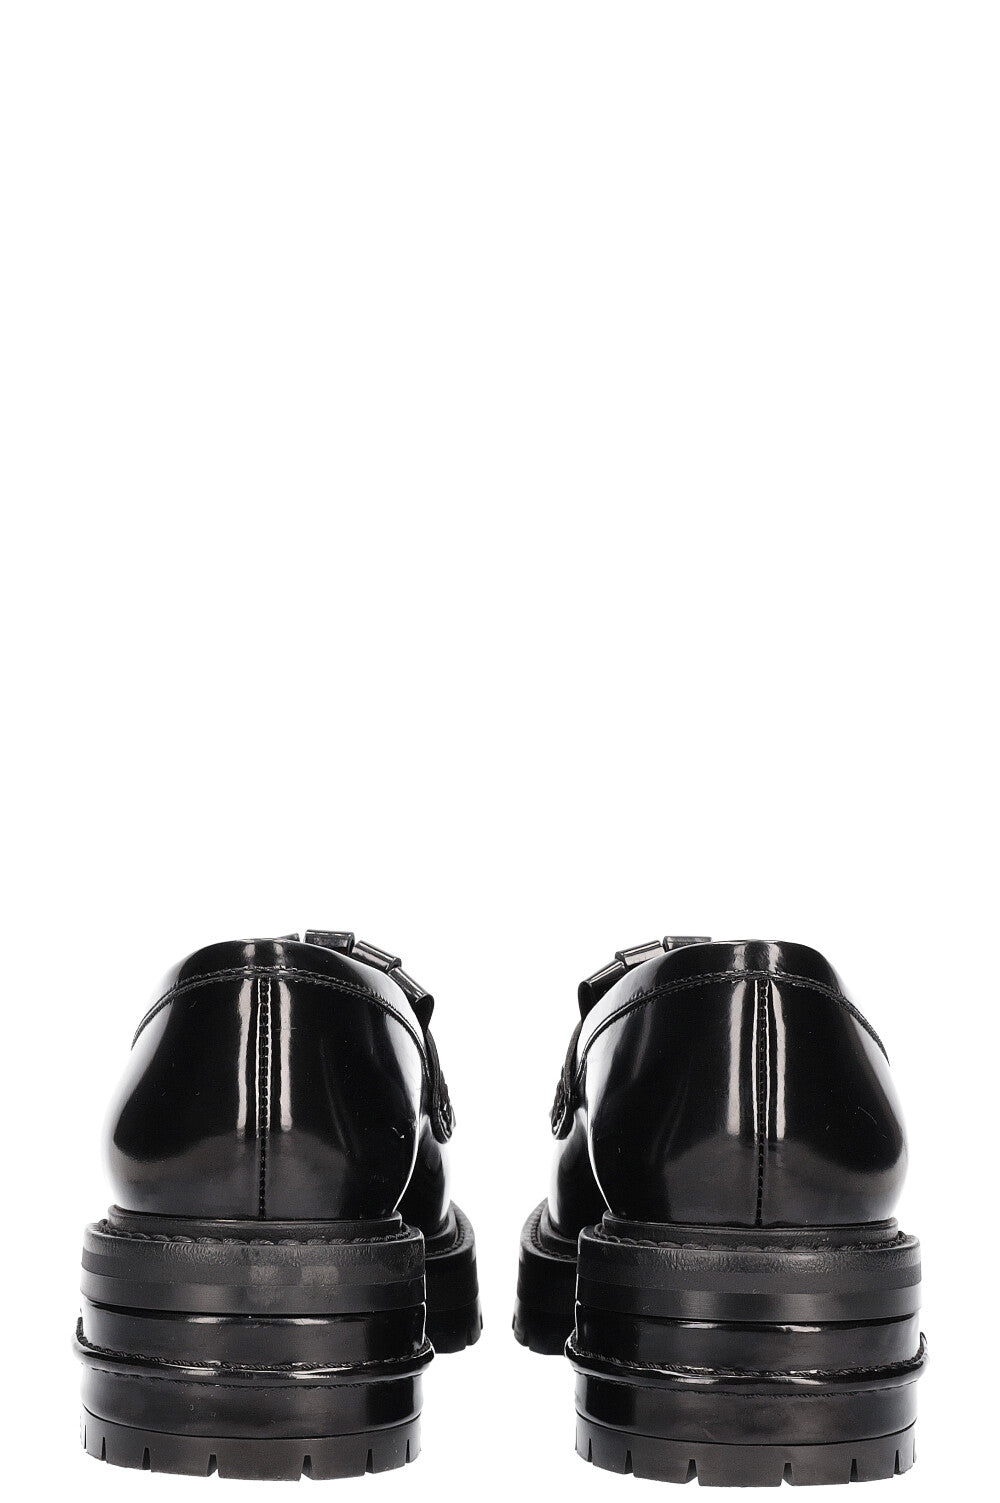 CHRISTIAN DIOR Penny Loafers